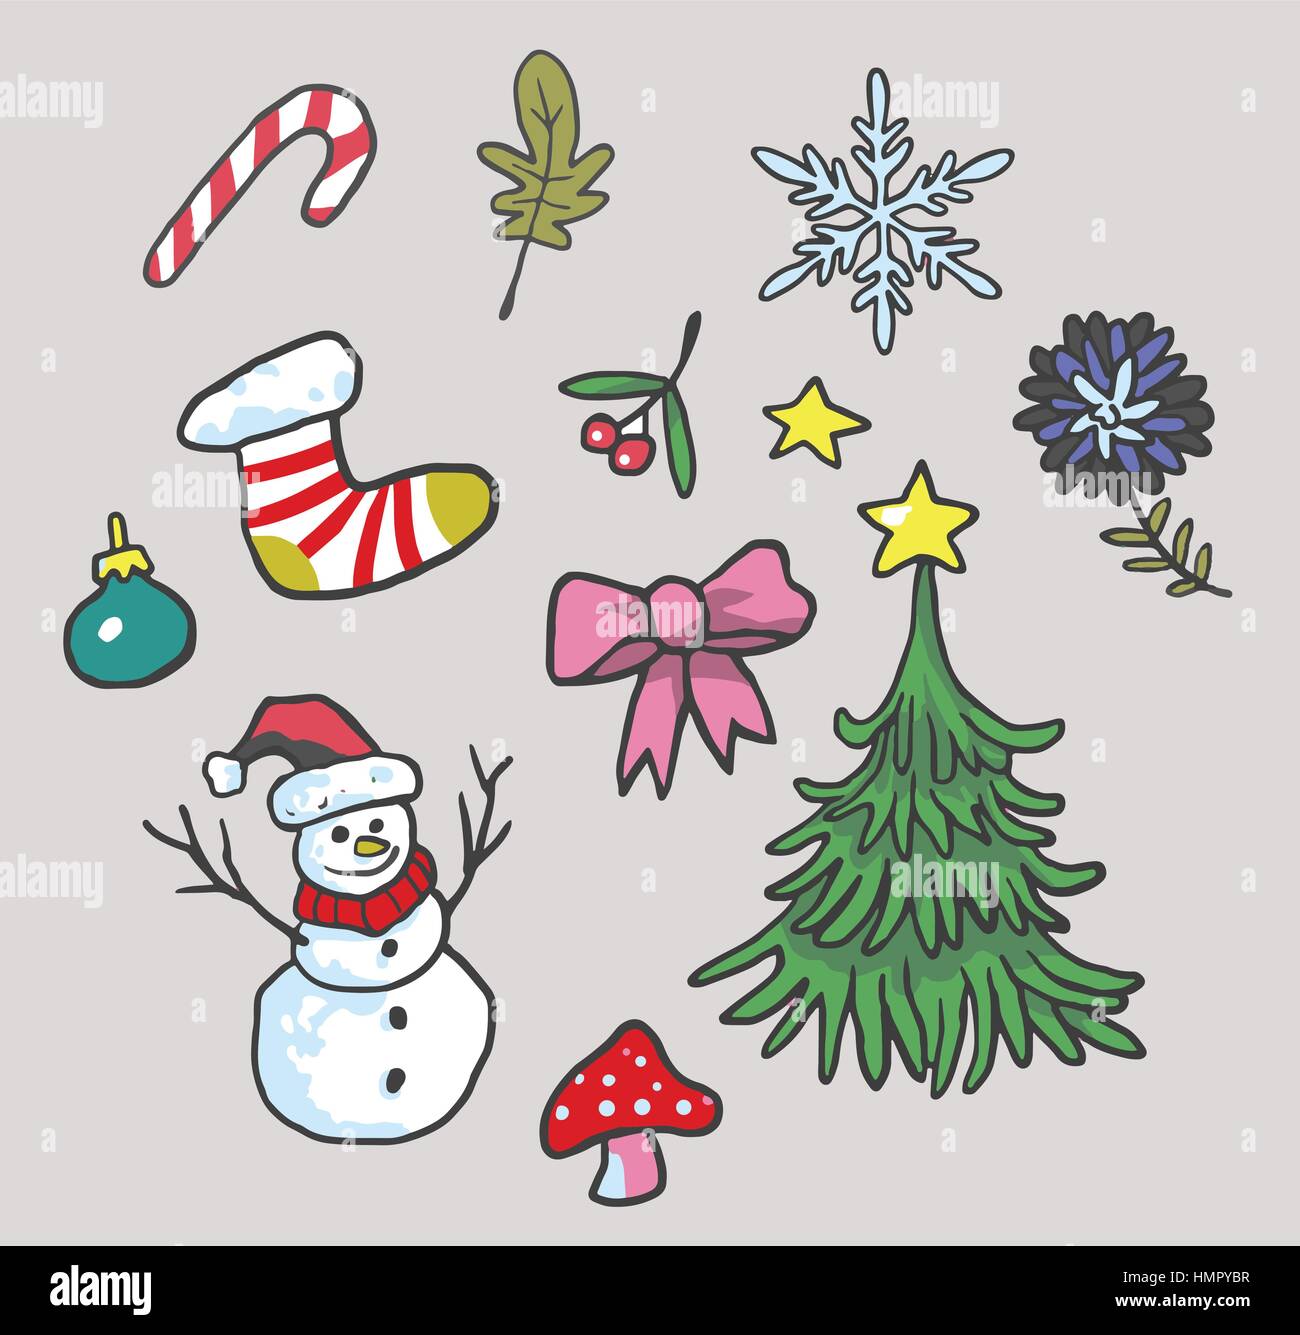 Christmas Icon Images Vector Set Illustration Stock Vector